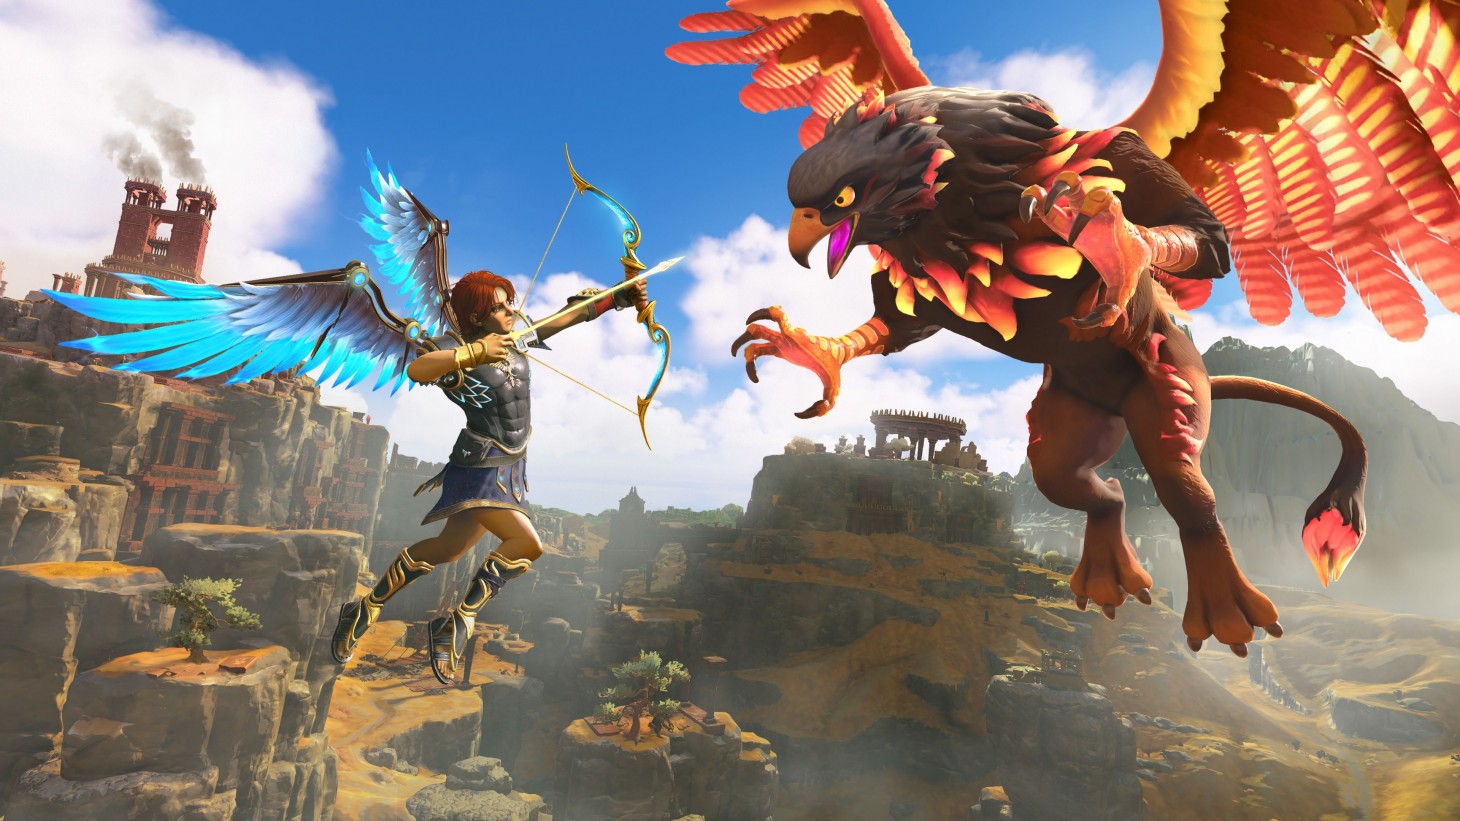 Figure 1: Image from the new video game Immortals Fenyx Rising.